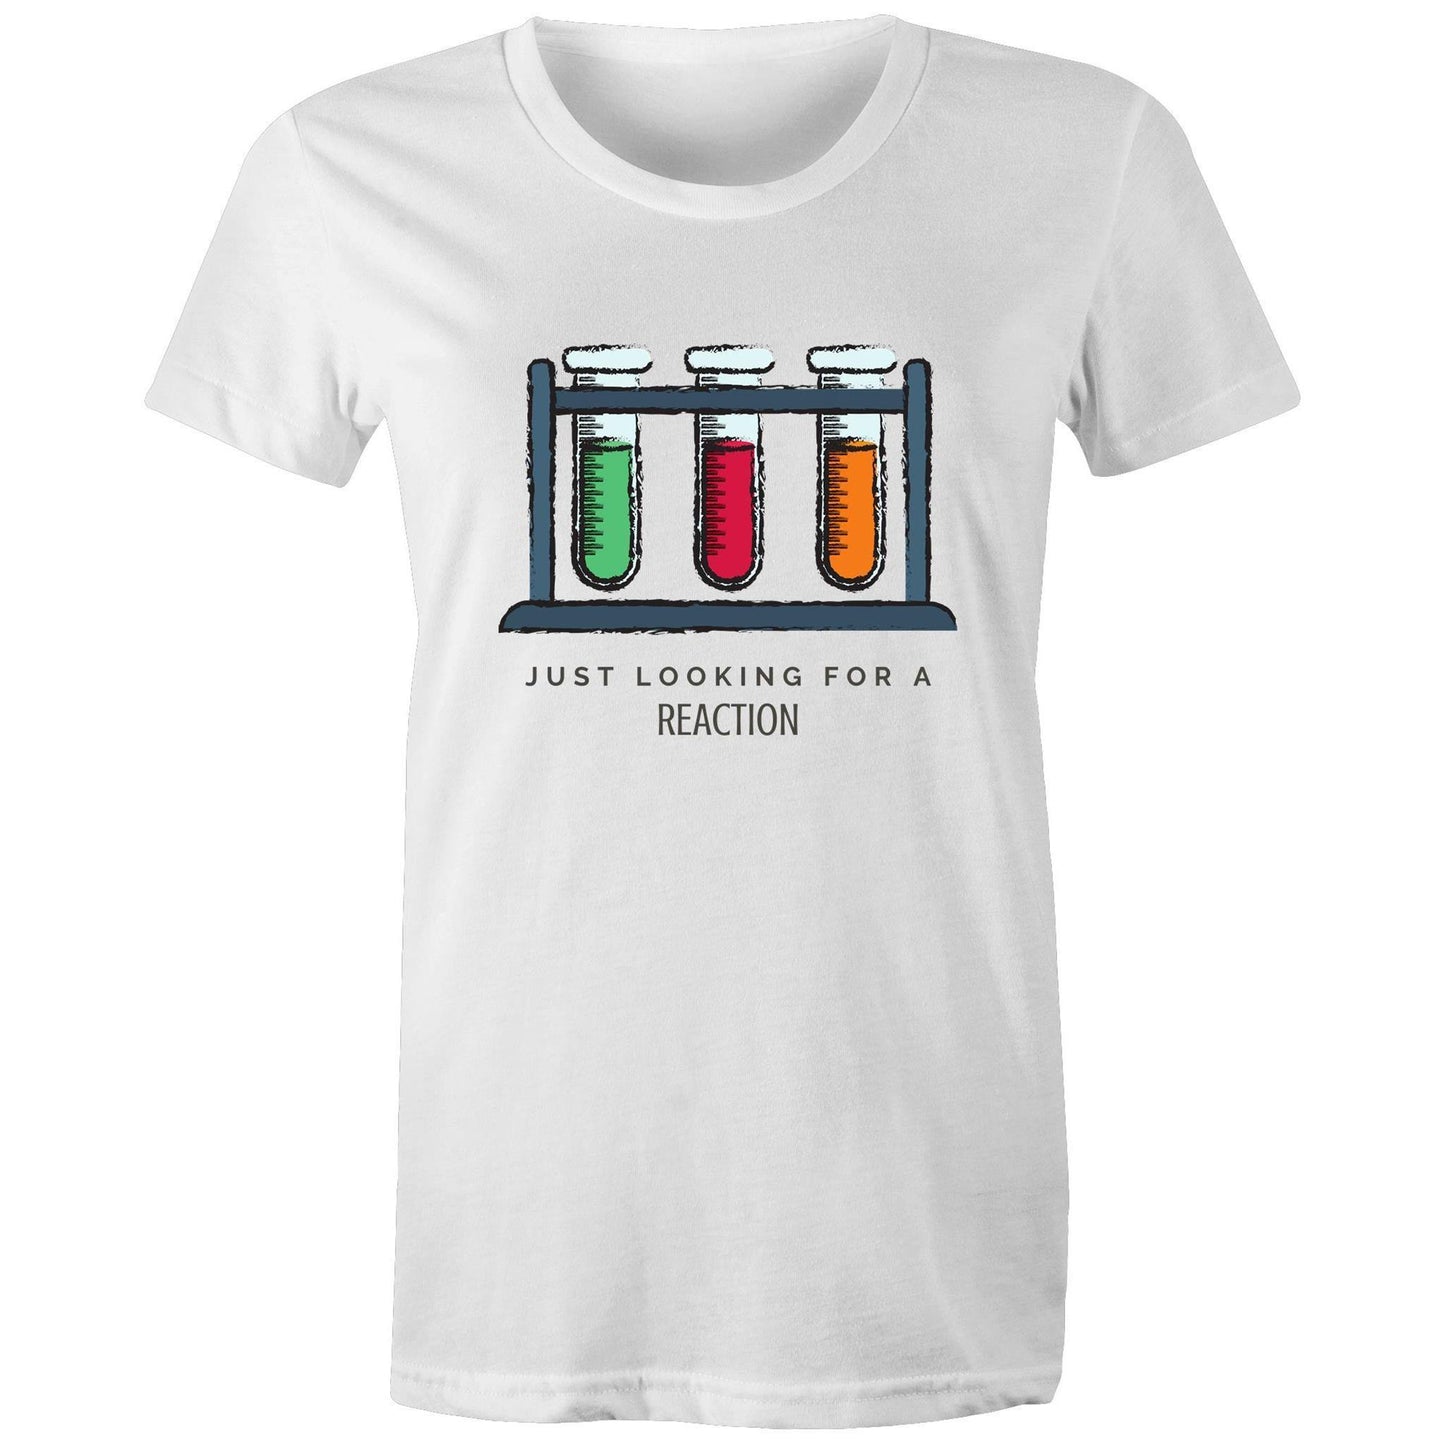 Test Tube, Just Looking For A Reaction - Women's T-shirt White Womens T-shirt Science Womens